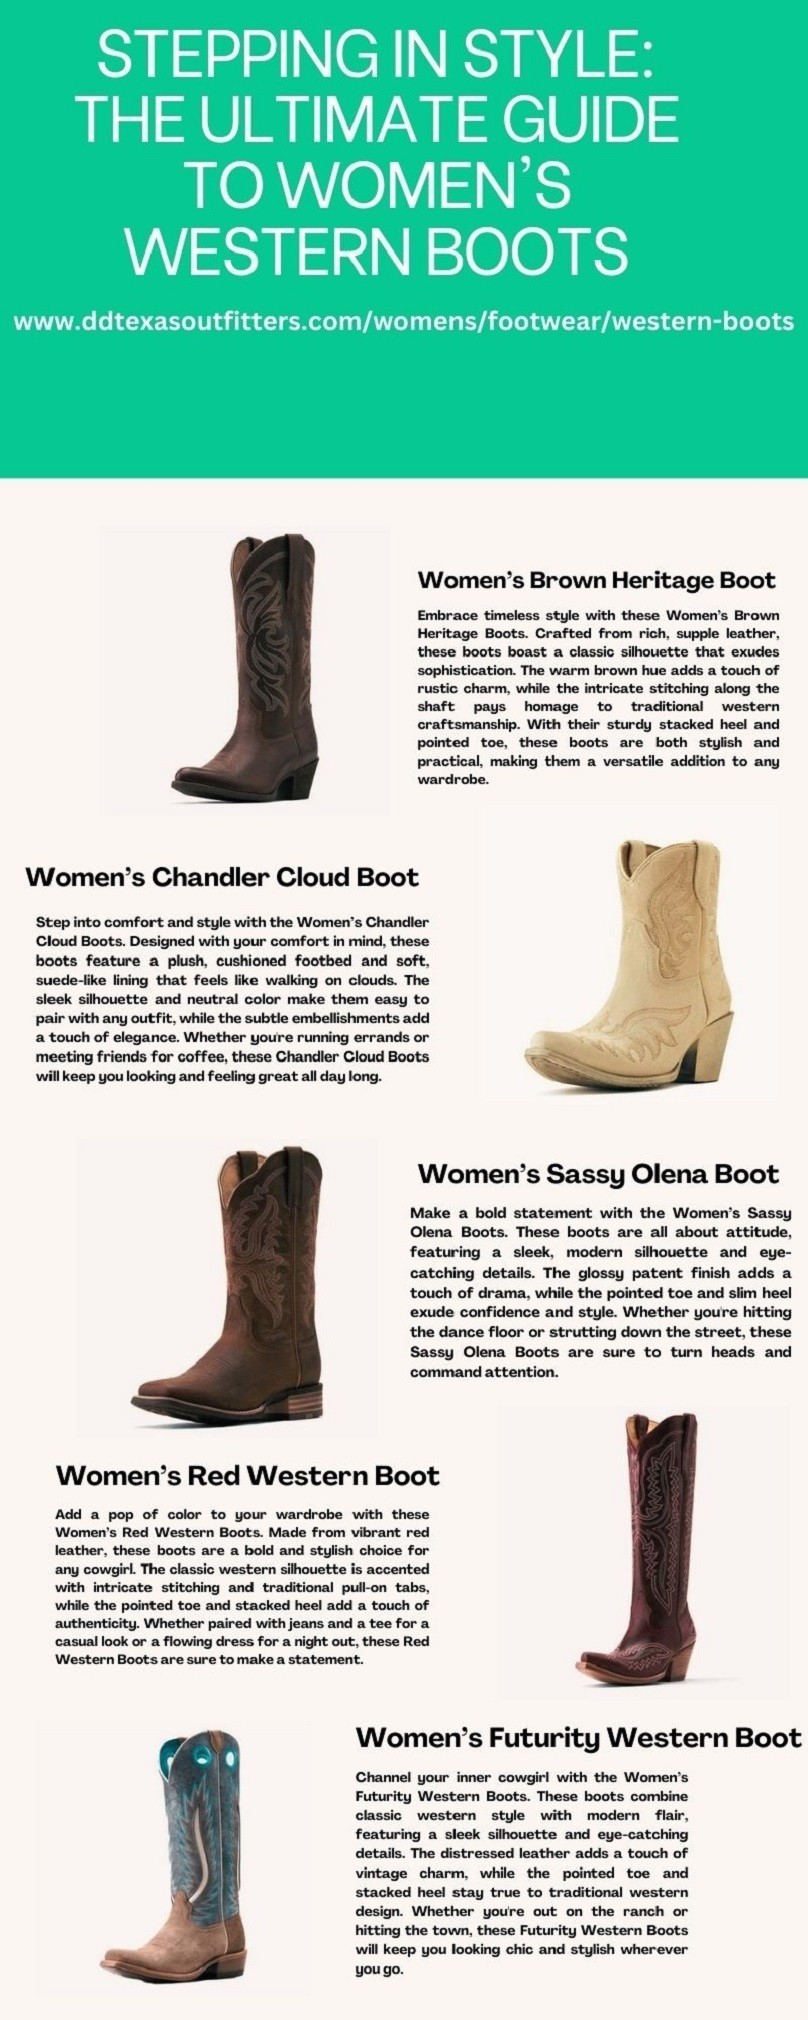 Stepping in Style The Ultimate Guide to Women's Western Boots